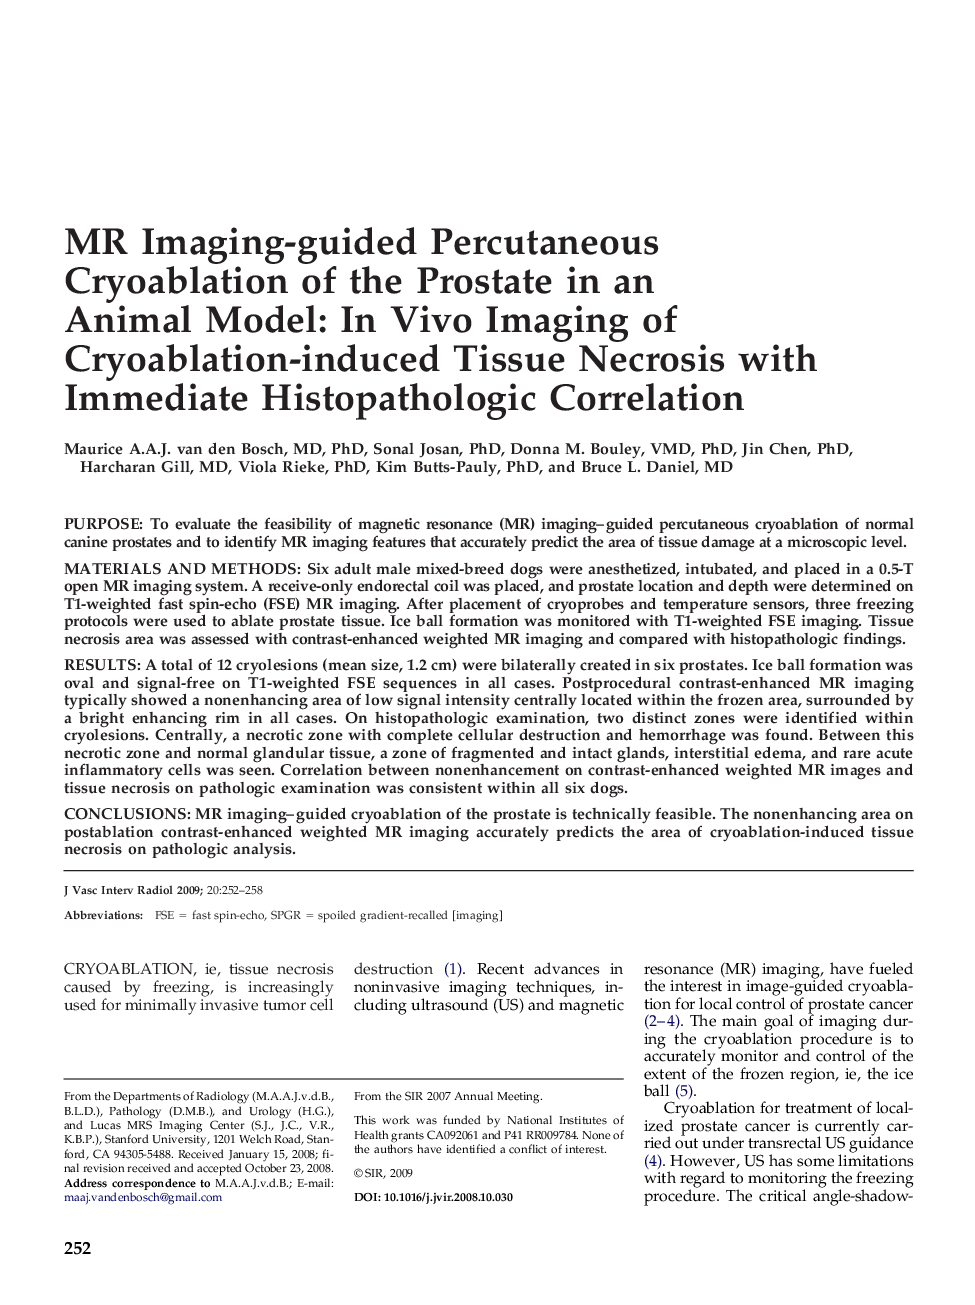 MR Imaging-guided Percutaneous Cryoablation of the Prostate in an Animal Model: In Vivo Imaging of Cryoablation-induced Tissue Necrosis with Immediate Histopathologic Correlation